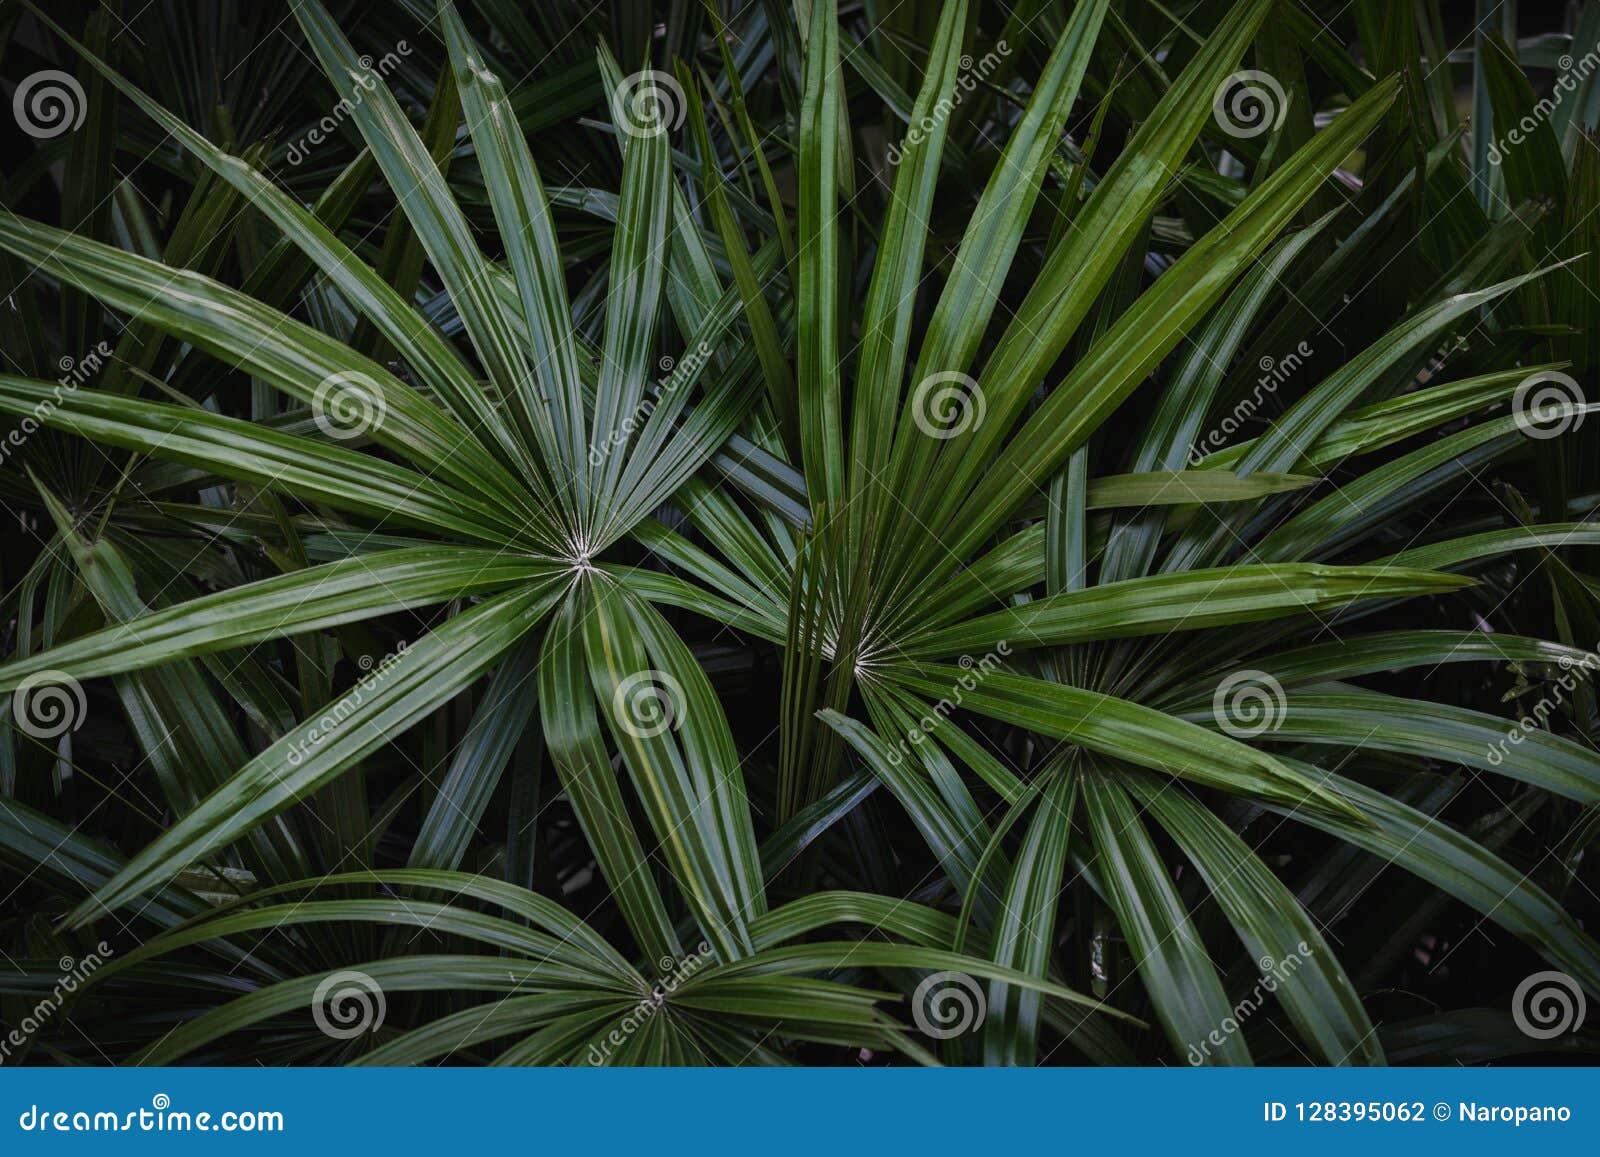 Palm Leaves Dark Background Stock Photo - Image of wall, branch: 128395062